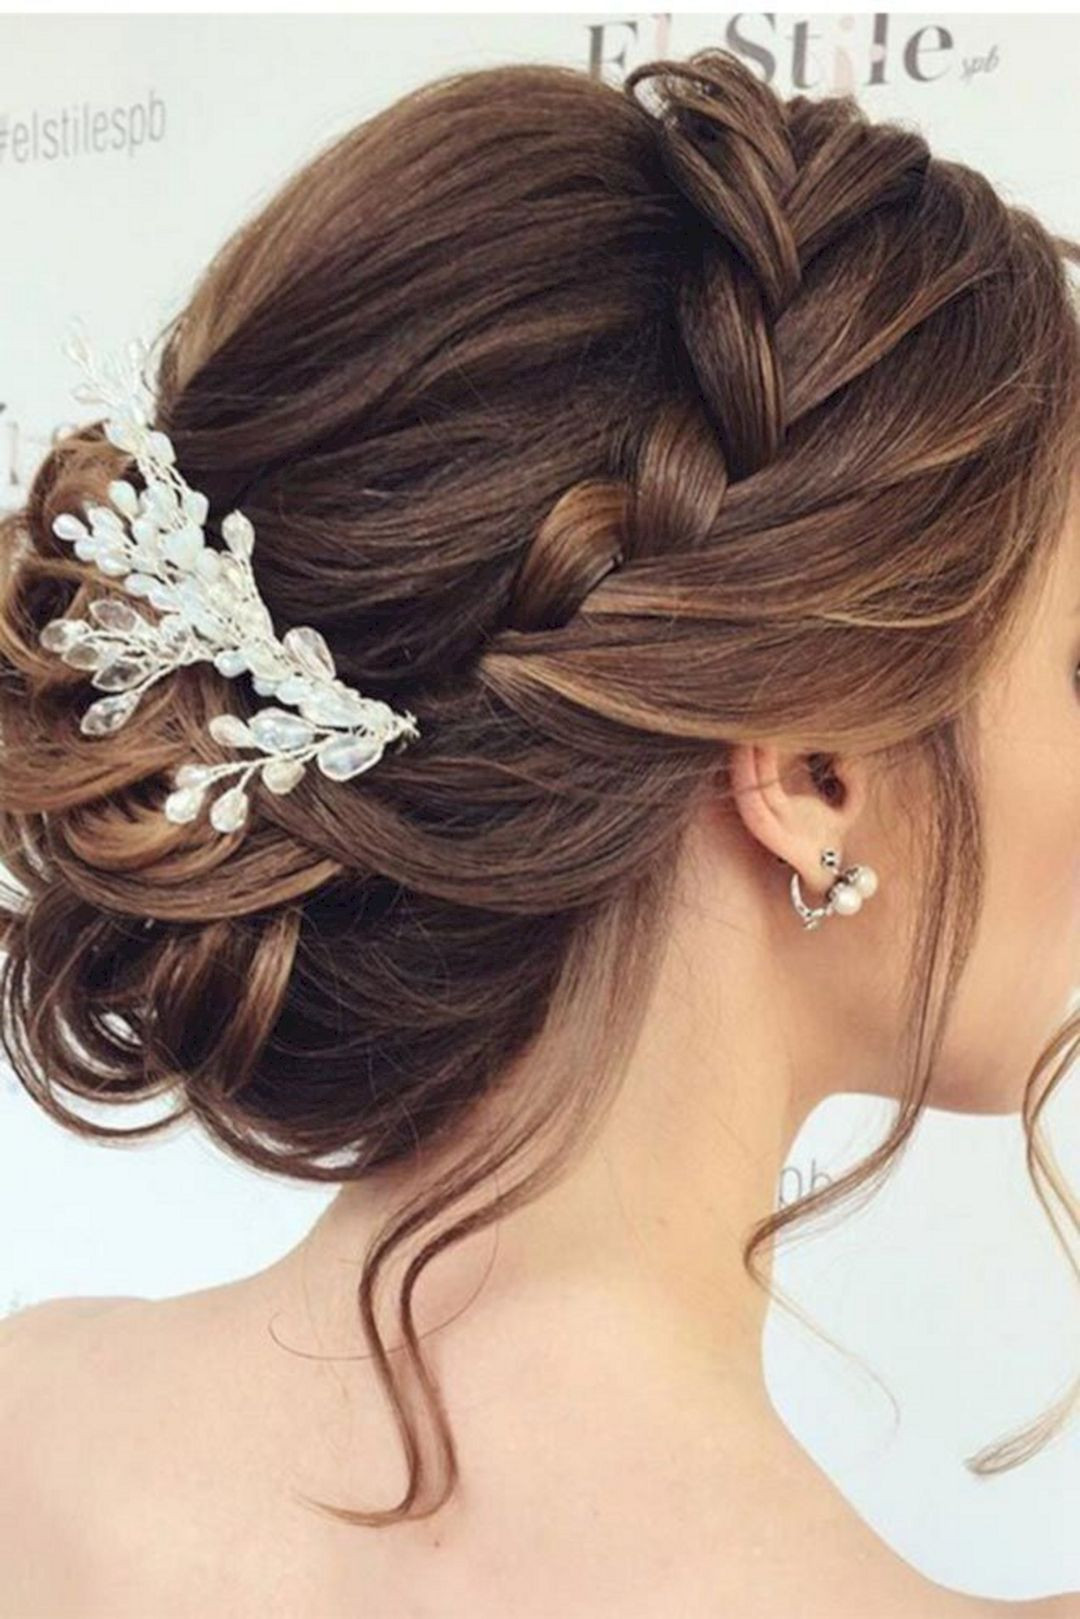 Updo Hairstyles For Weddings Bridesmaid
 Bridesmaid Updo Hairstyles Long Hair – OOSILE